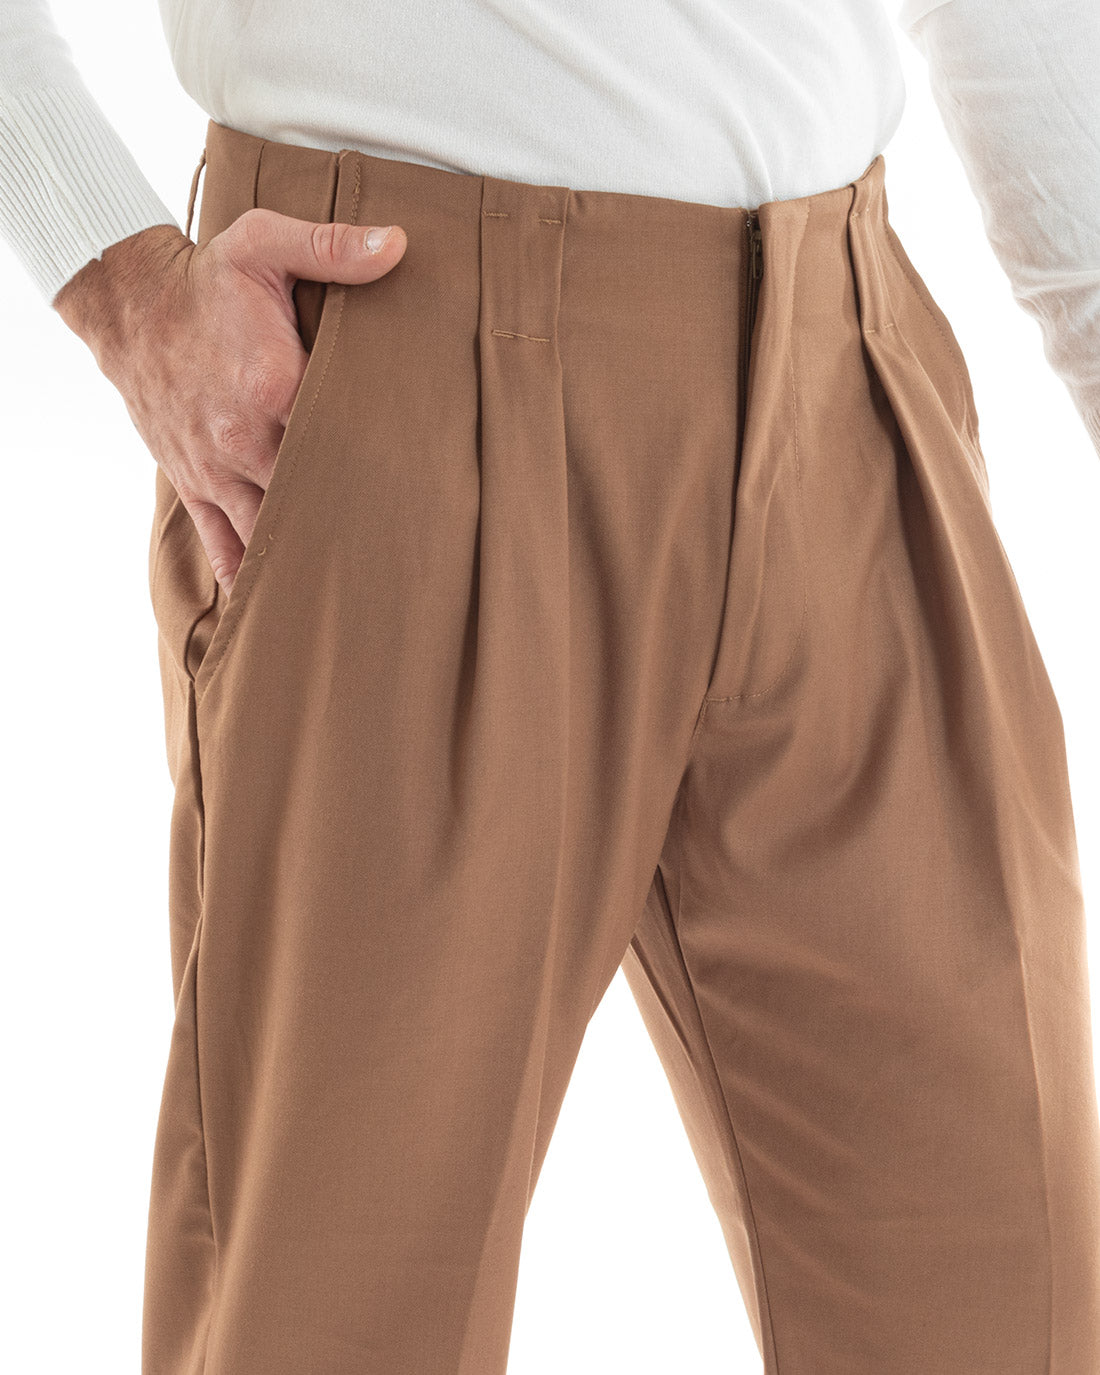 Classic Men's Long Pleated Trousers Solid Color Camel America Pocket GIOSAL